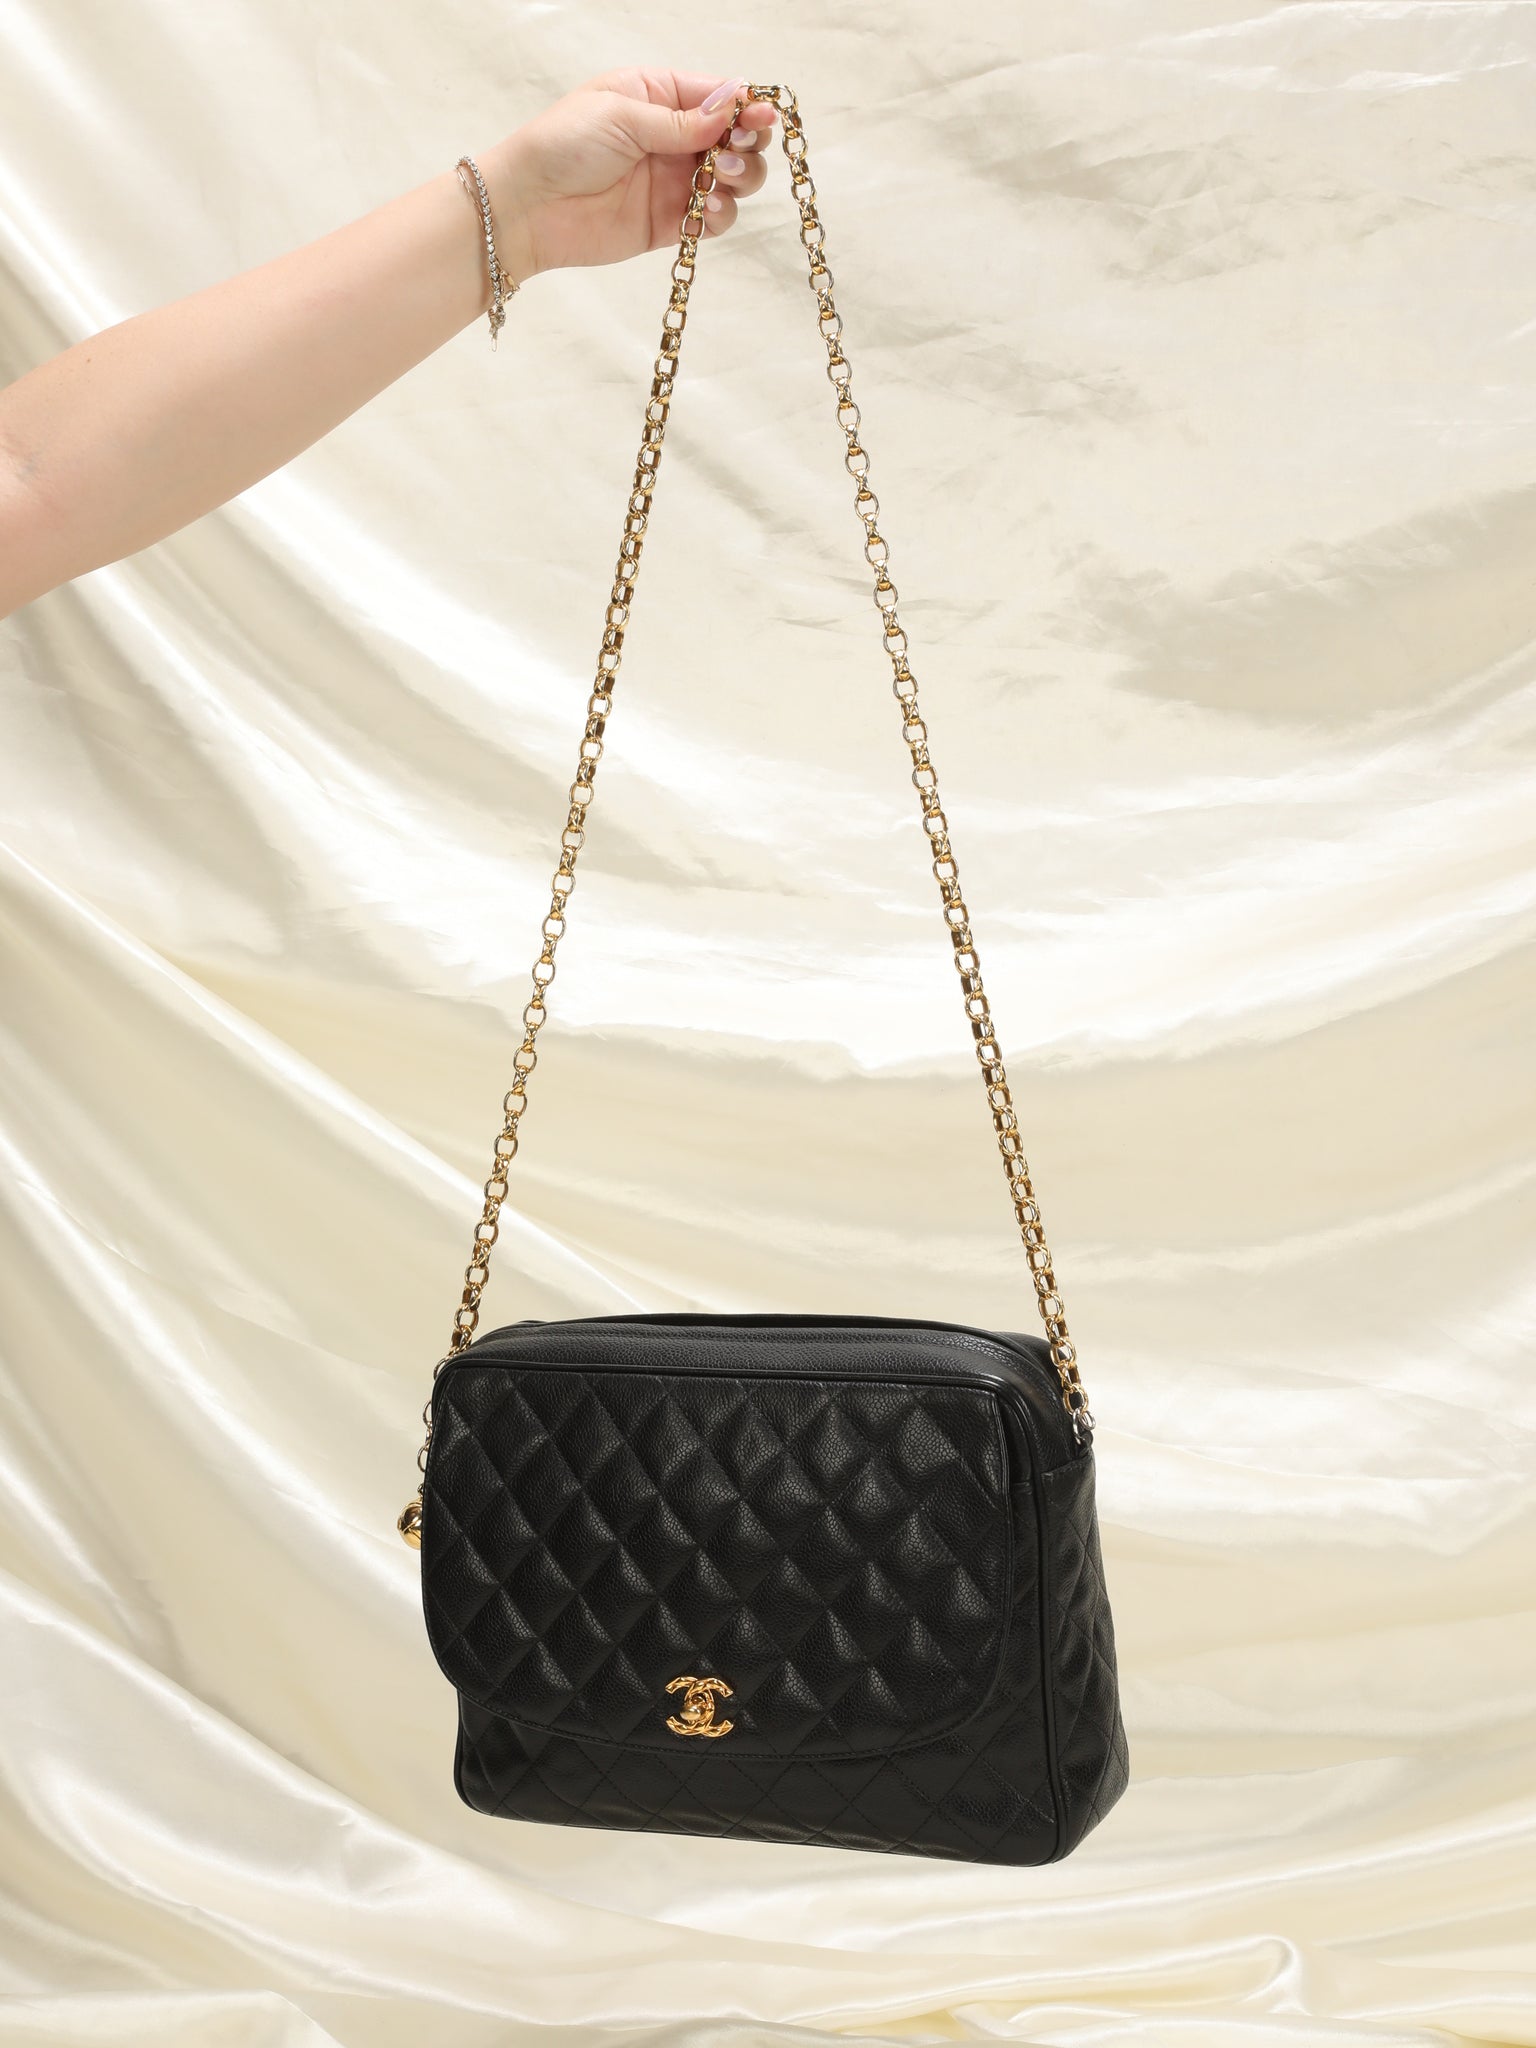 CHANEL Small Chain-Link Quilted Camera Bag OUTLET FINAL SALE